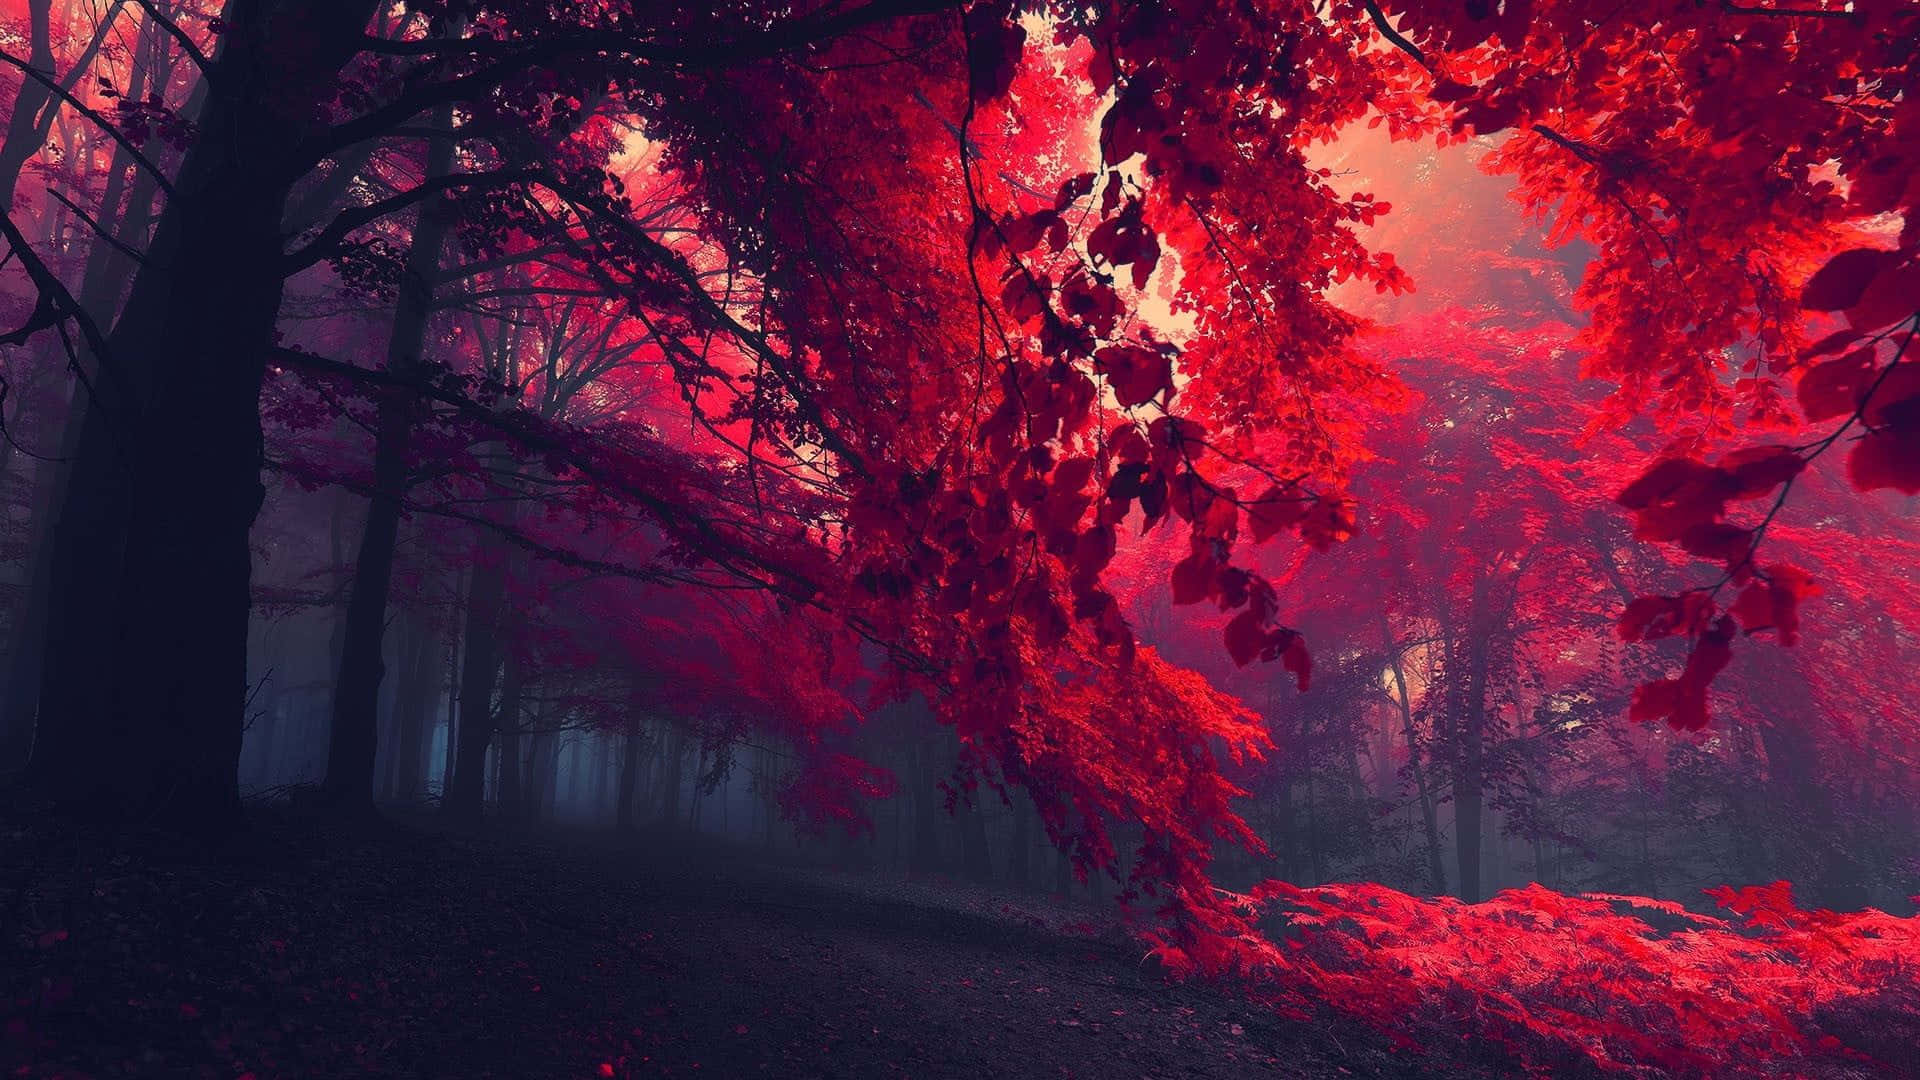 "Beautiful Red Tree in Nature" Wallpaper